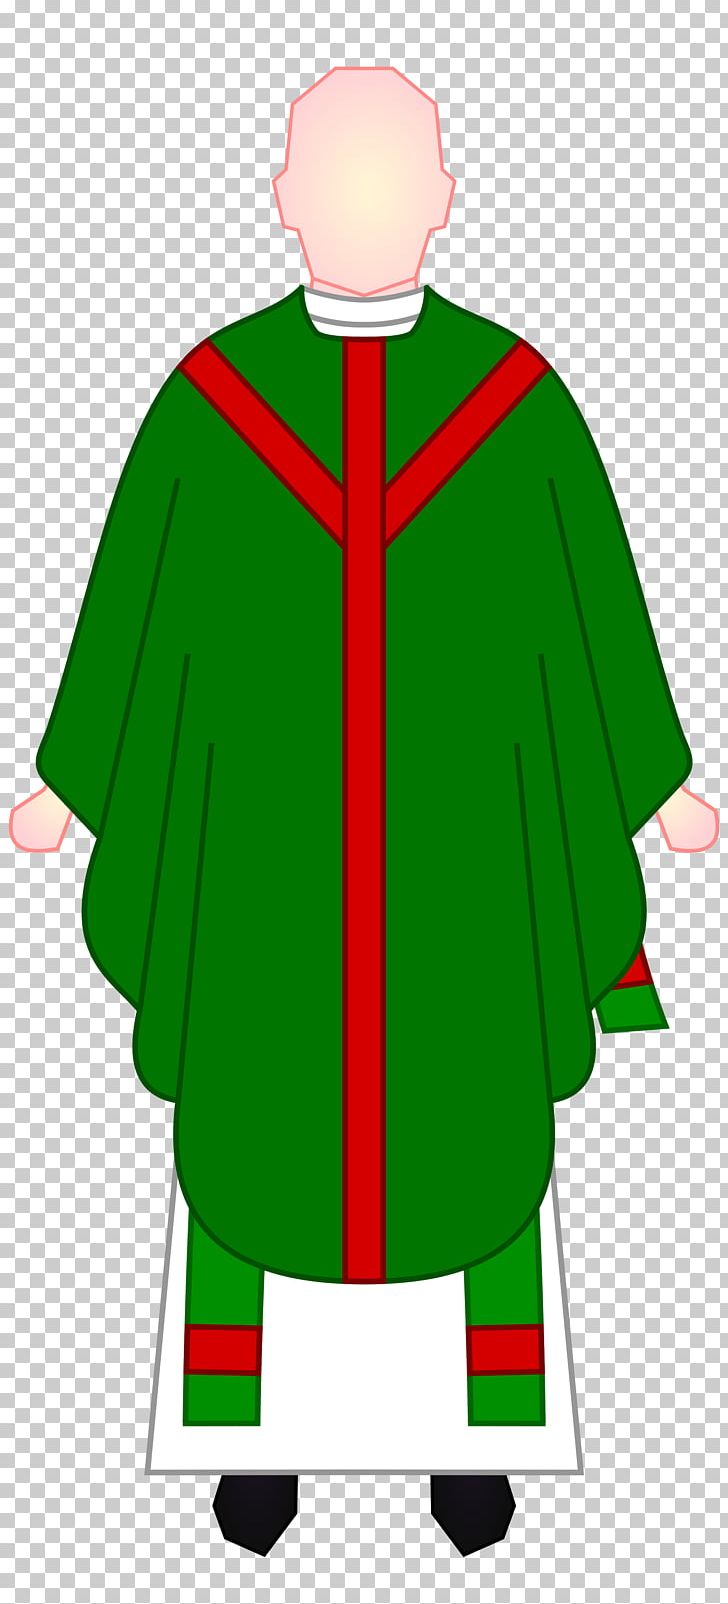 Robe Vestment Priest Chasuble PNG, Clipart, Academic Dress, Anglican Priest, Chasuble, Clerical Clothing, Clothing Free PNG Download